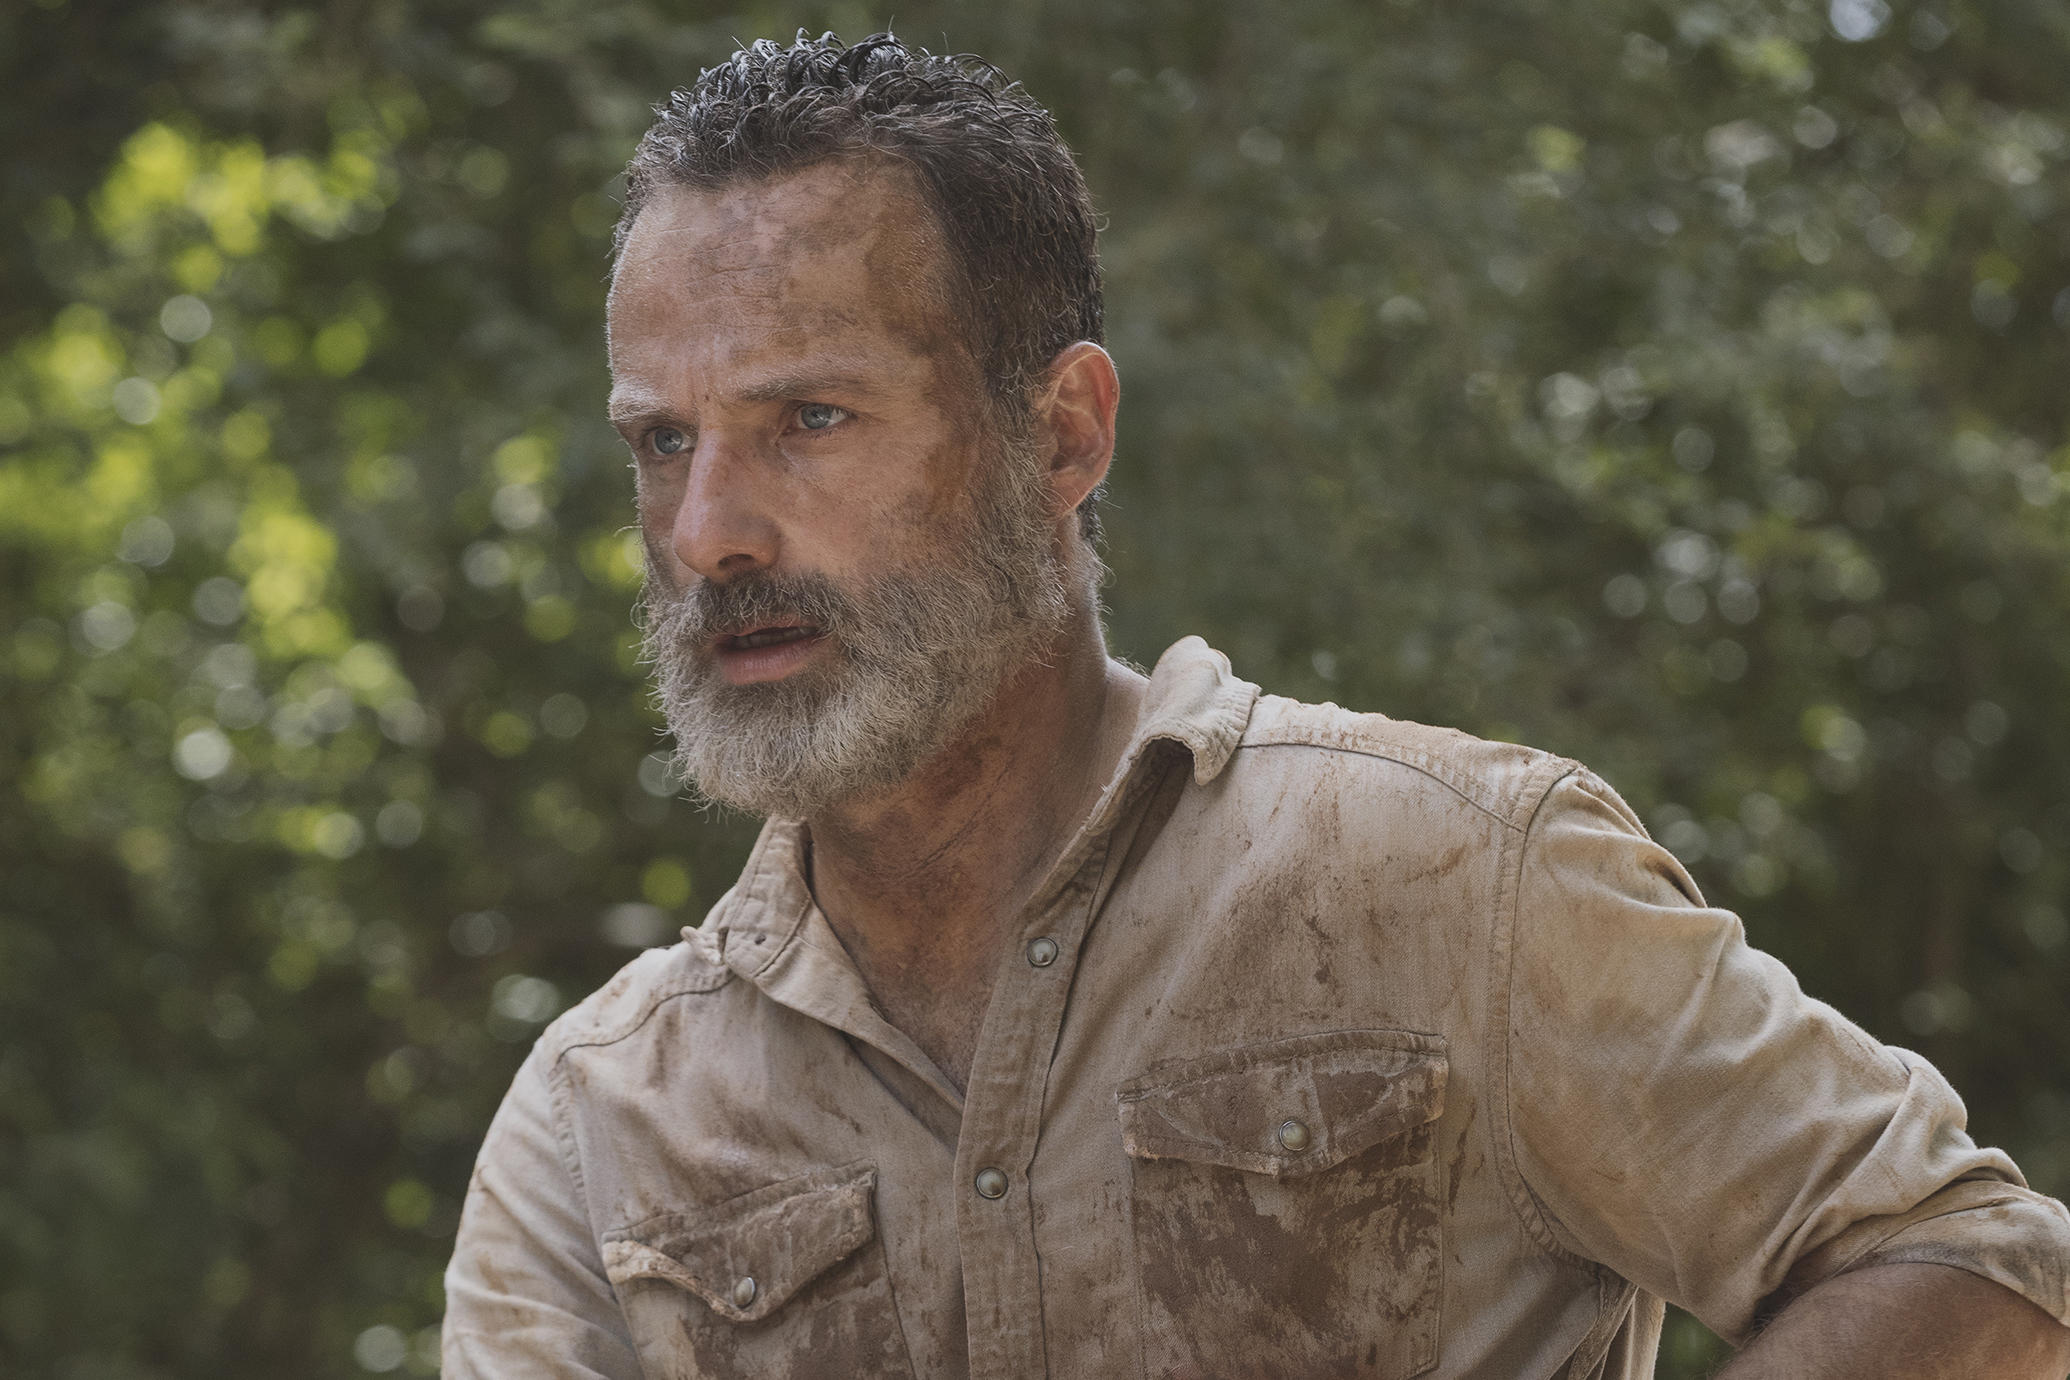 💀 How Well Do You Know “The Walking Dead”? Quiz Andrew Lincoln as Rick Grimes on The Walking Dead